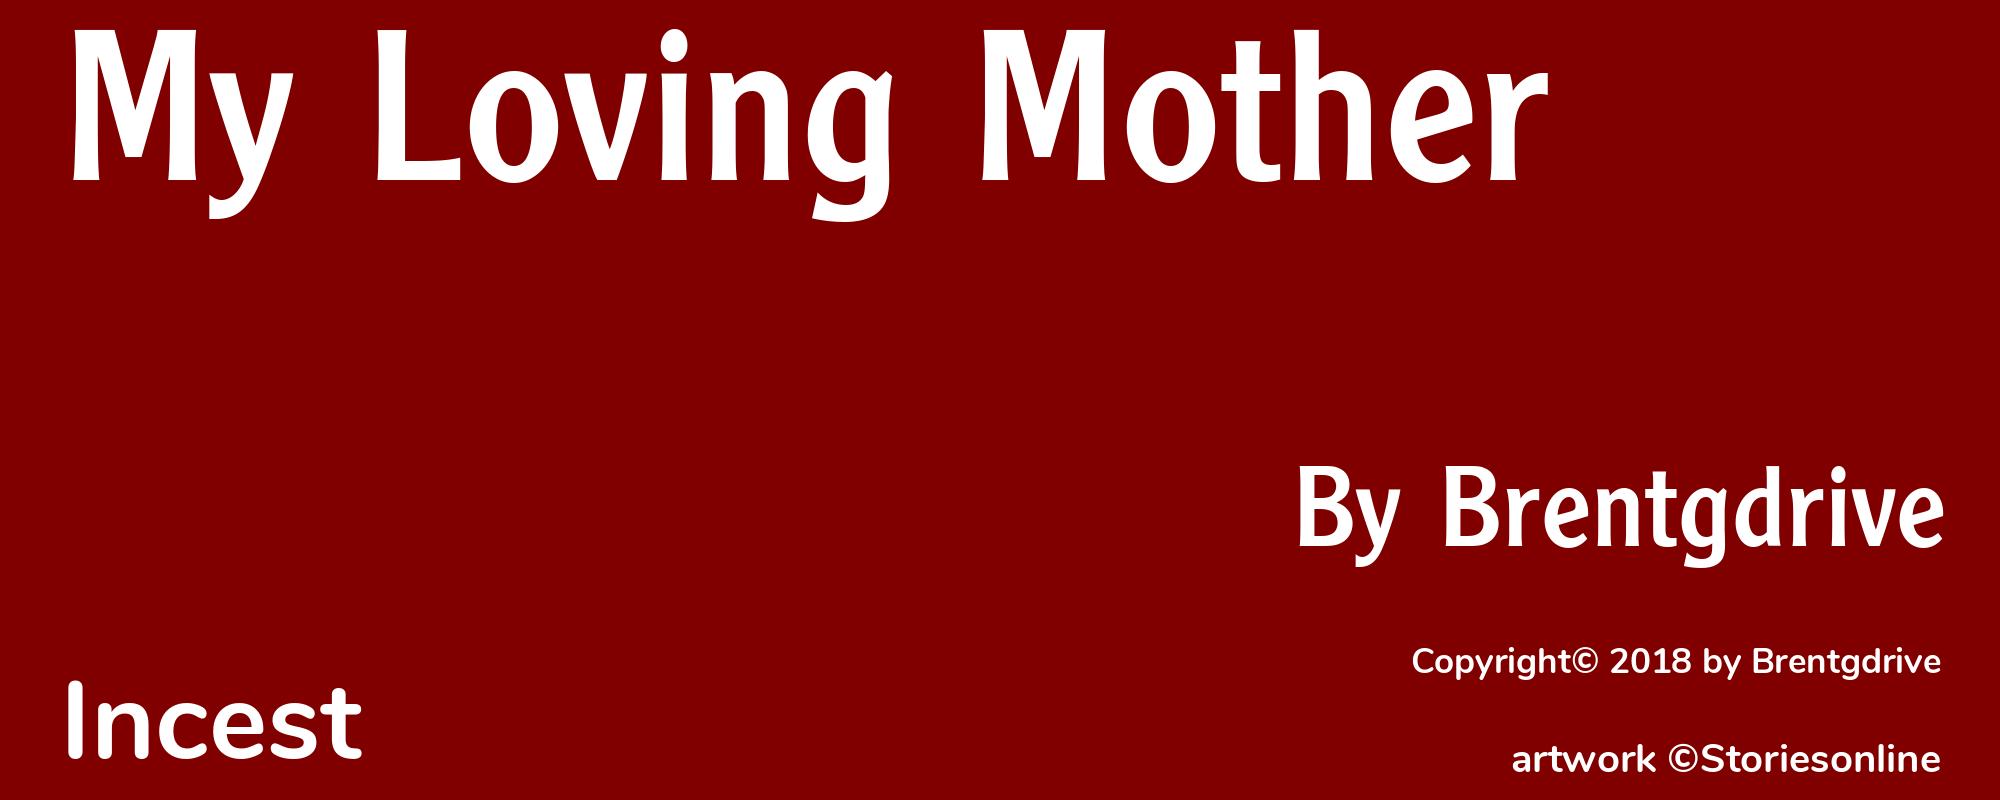 My Loving Mother - Cover